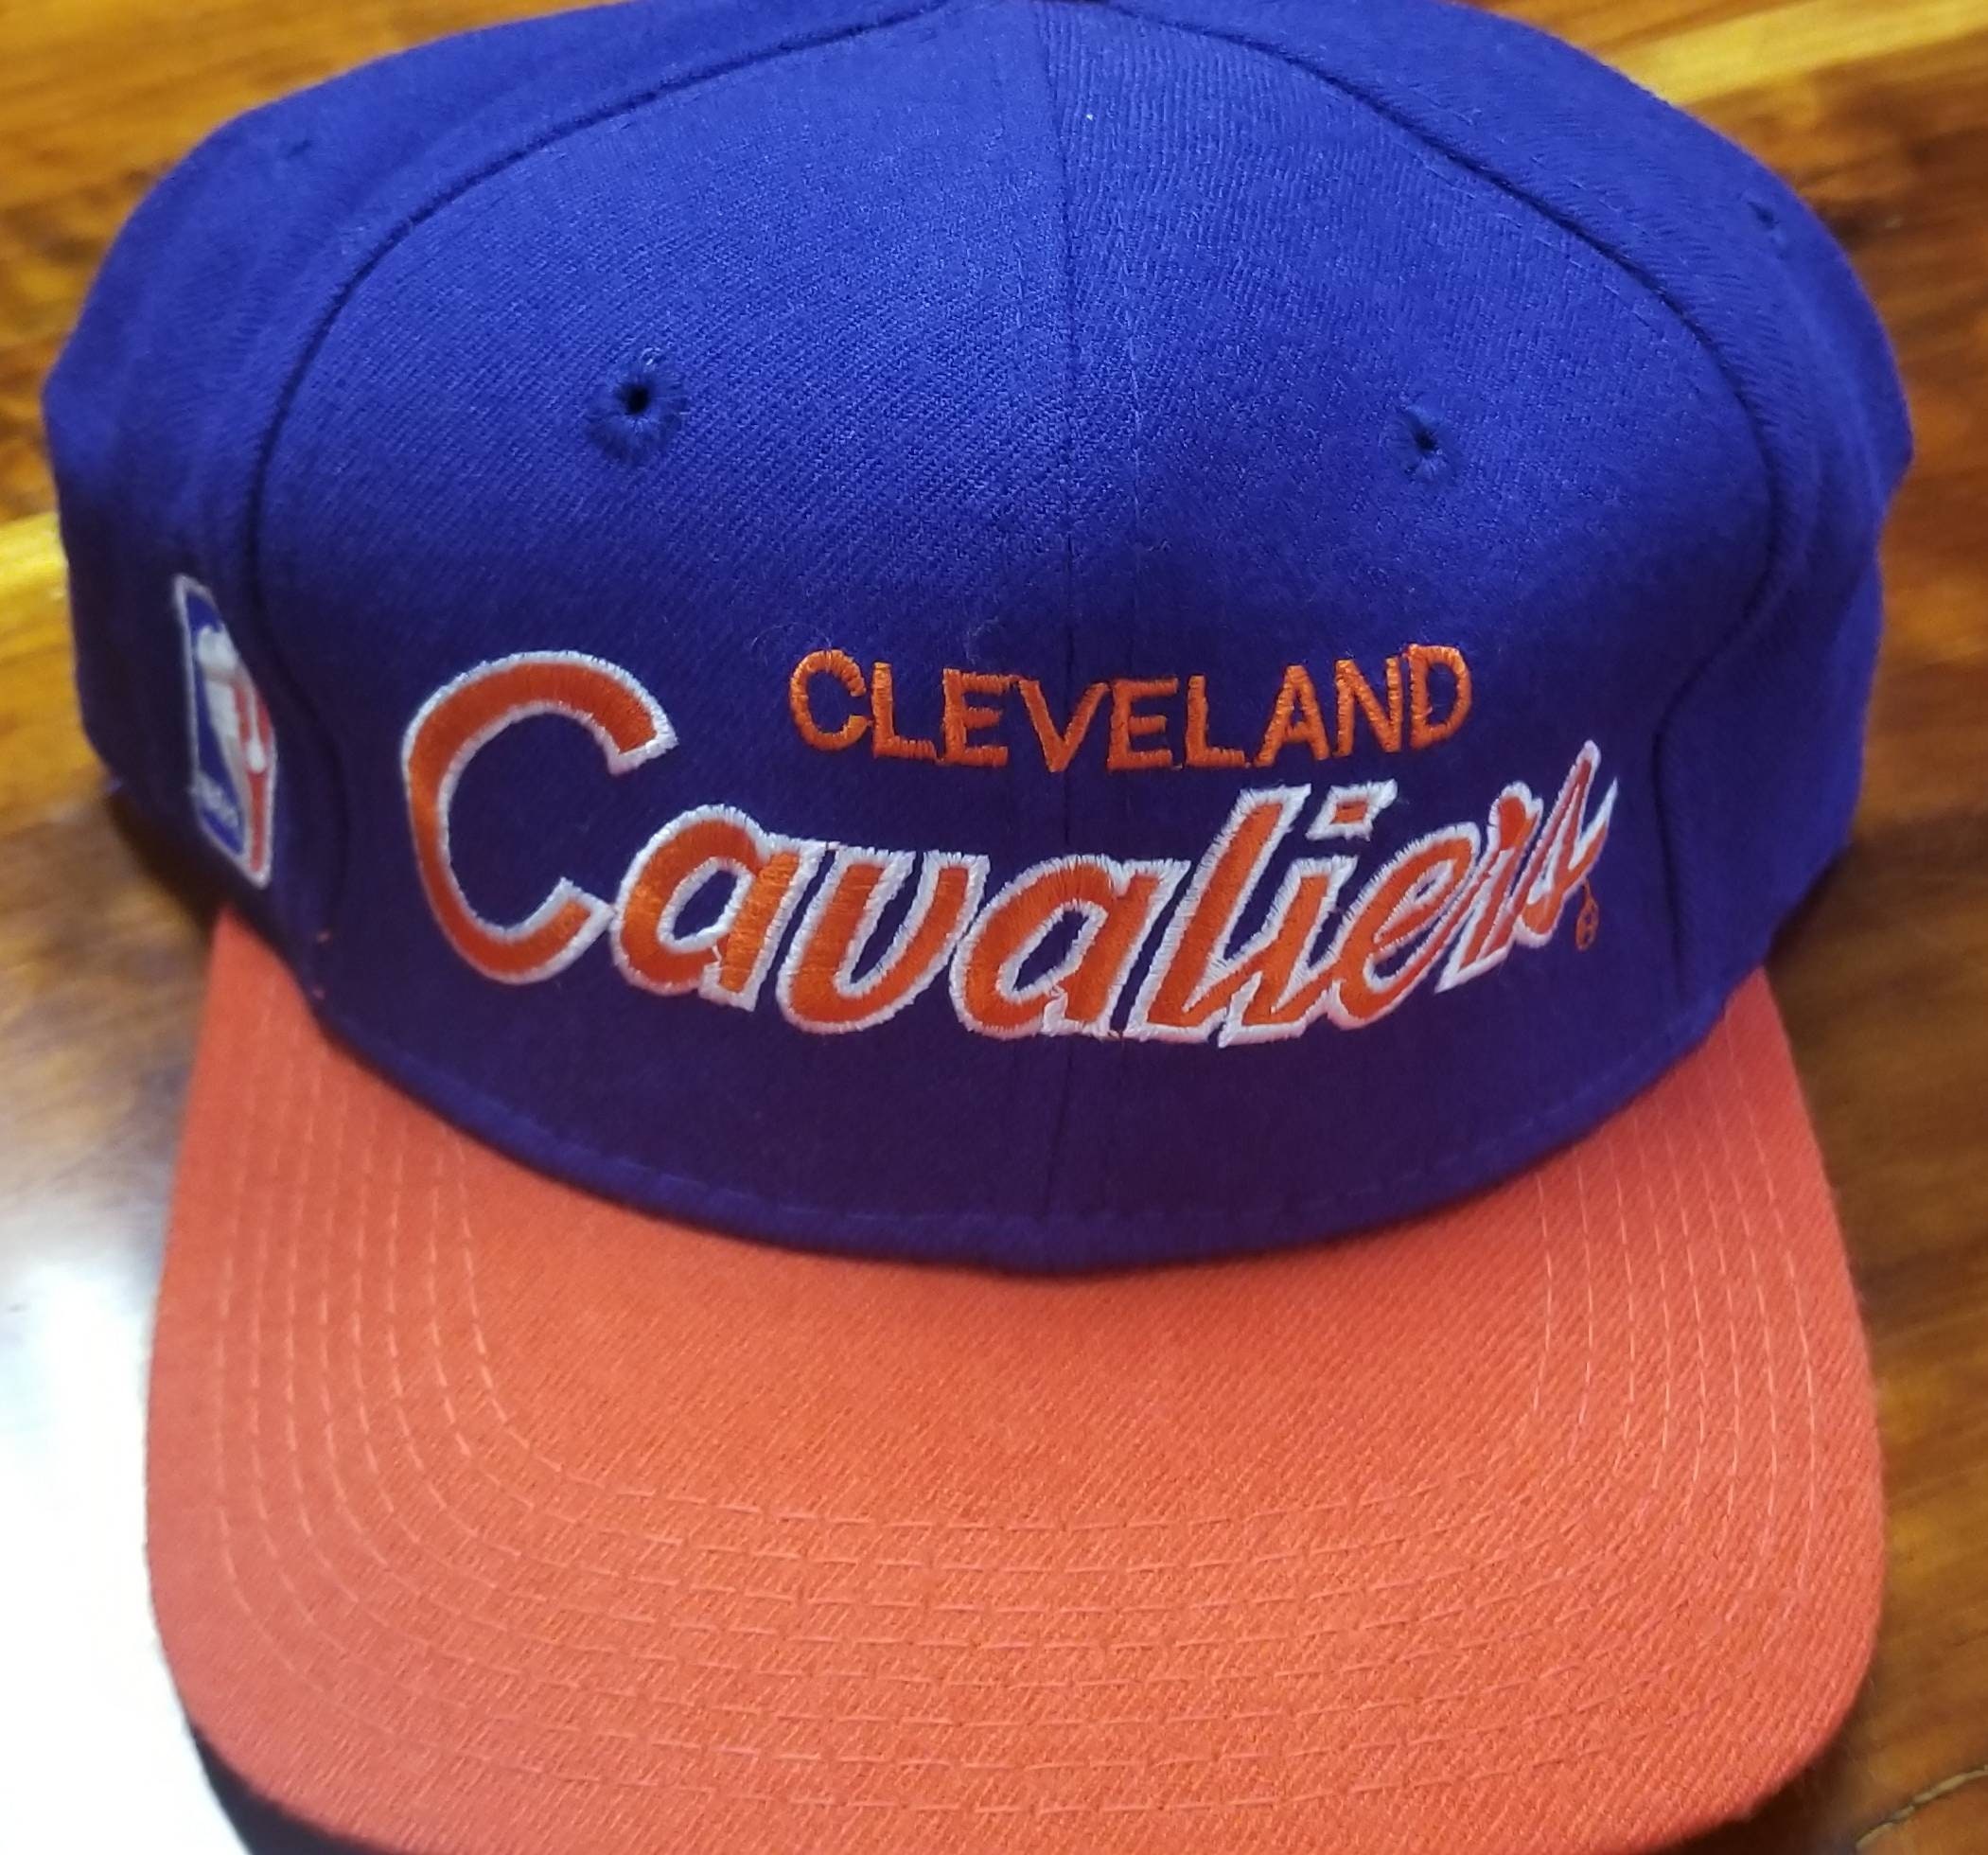 Cavaliers Gear Guide: 25 must-have jerseys, hats, jackets and tees